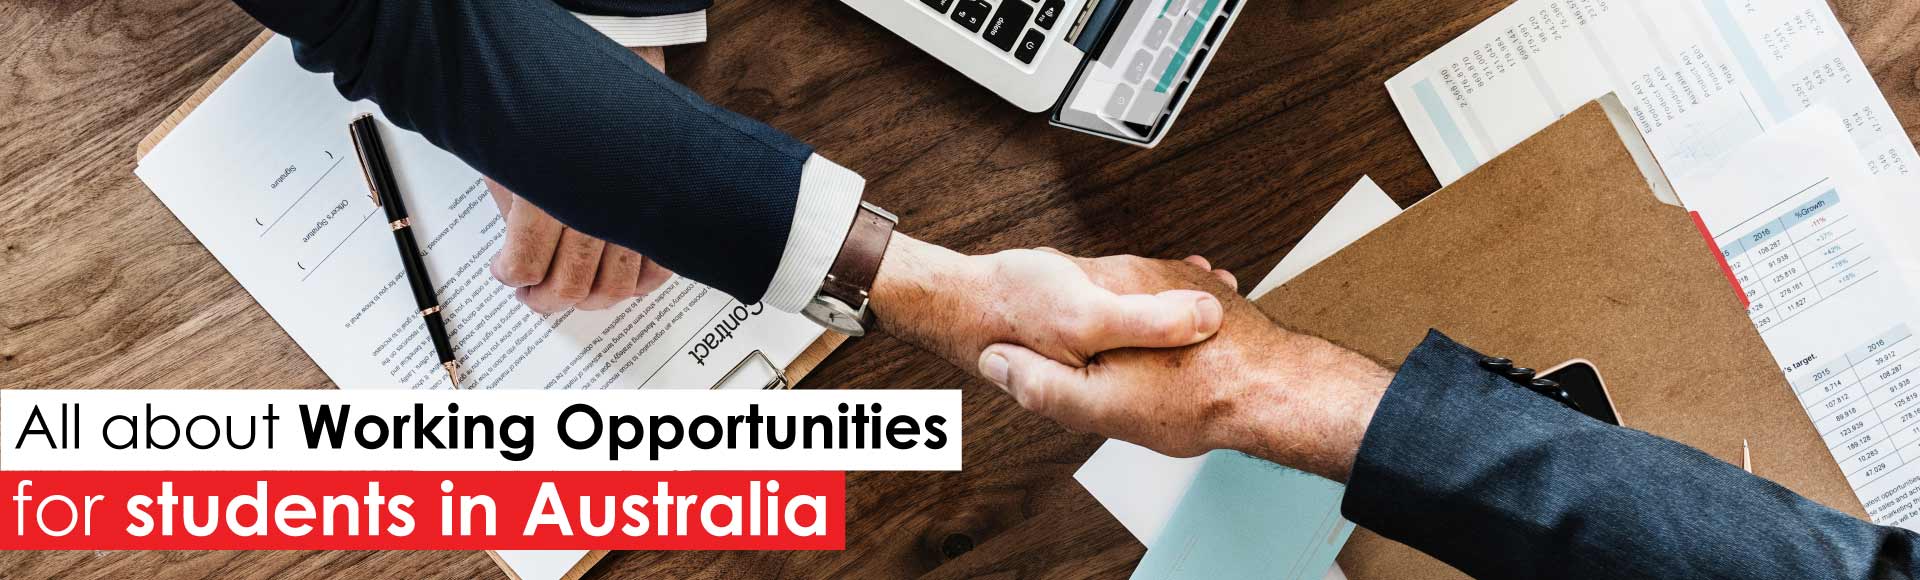 All about working opportunities for students in Australia